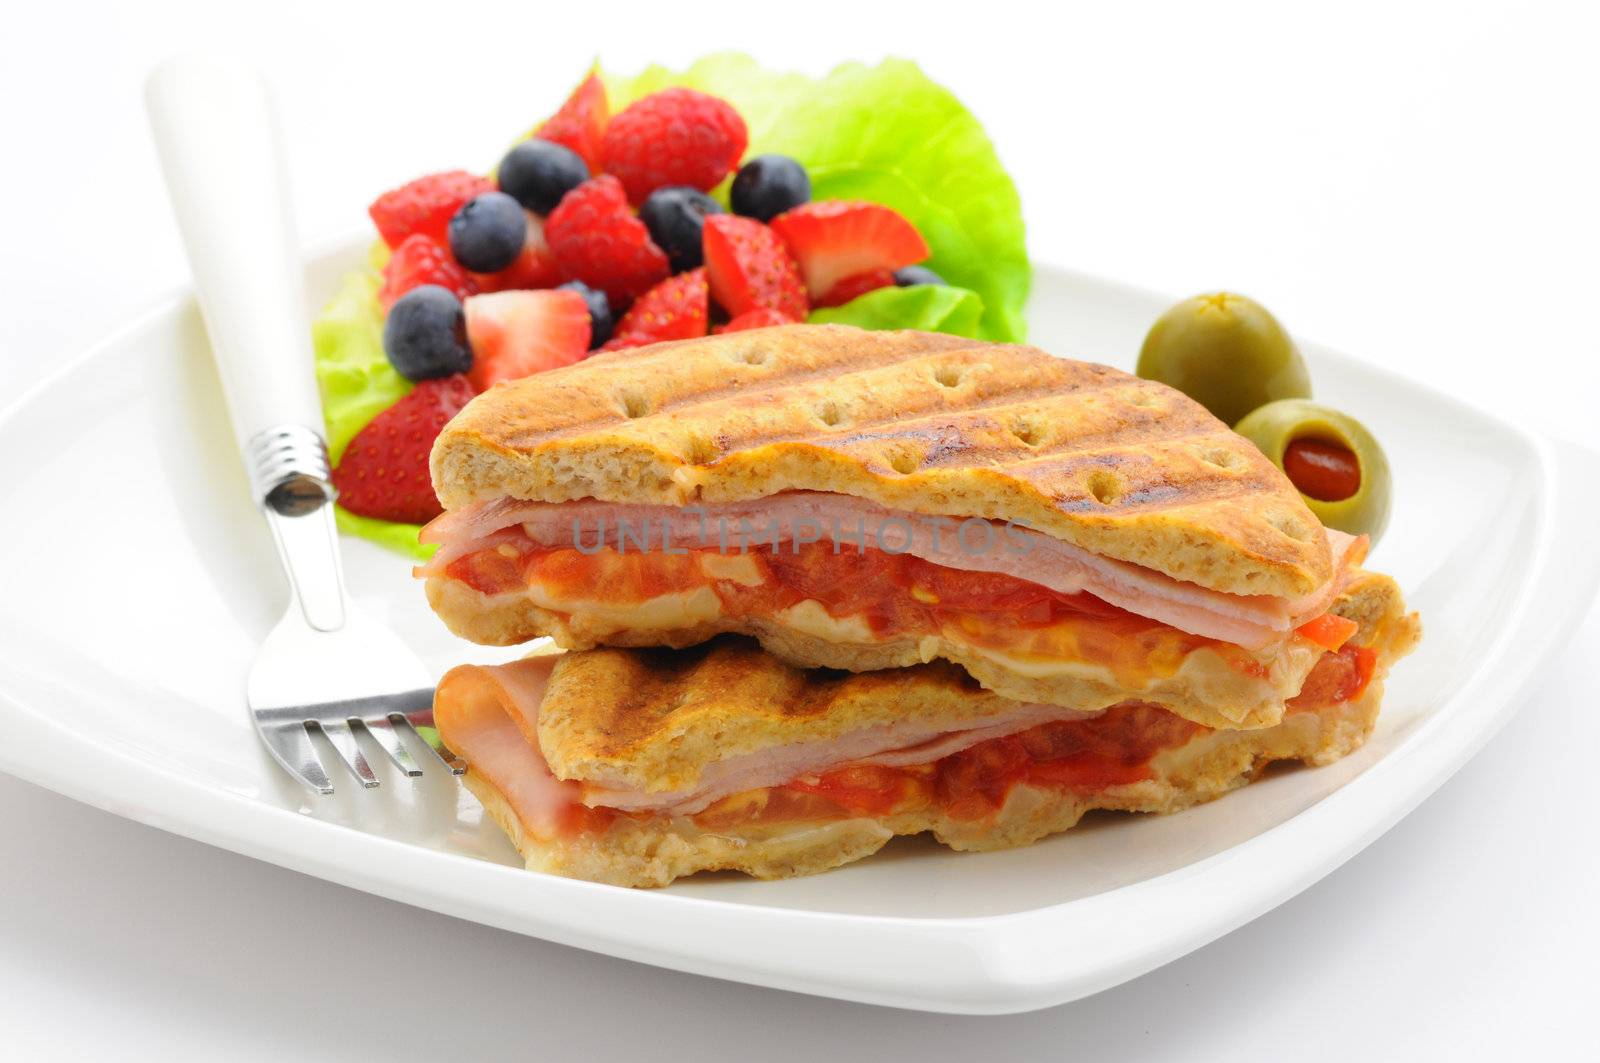 Delicious breakfast panini served with fresh fruit.